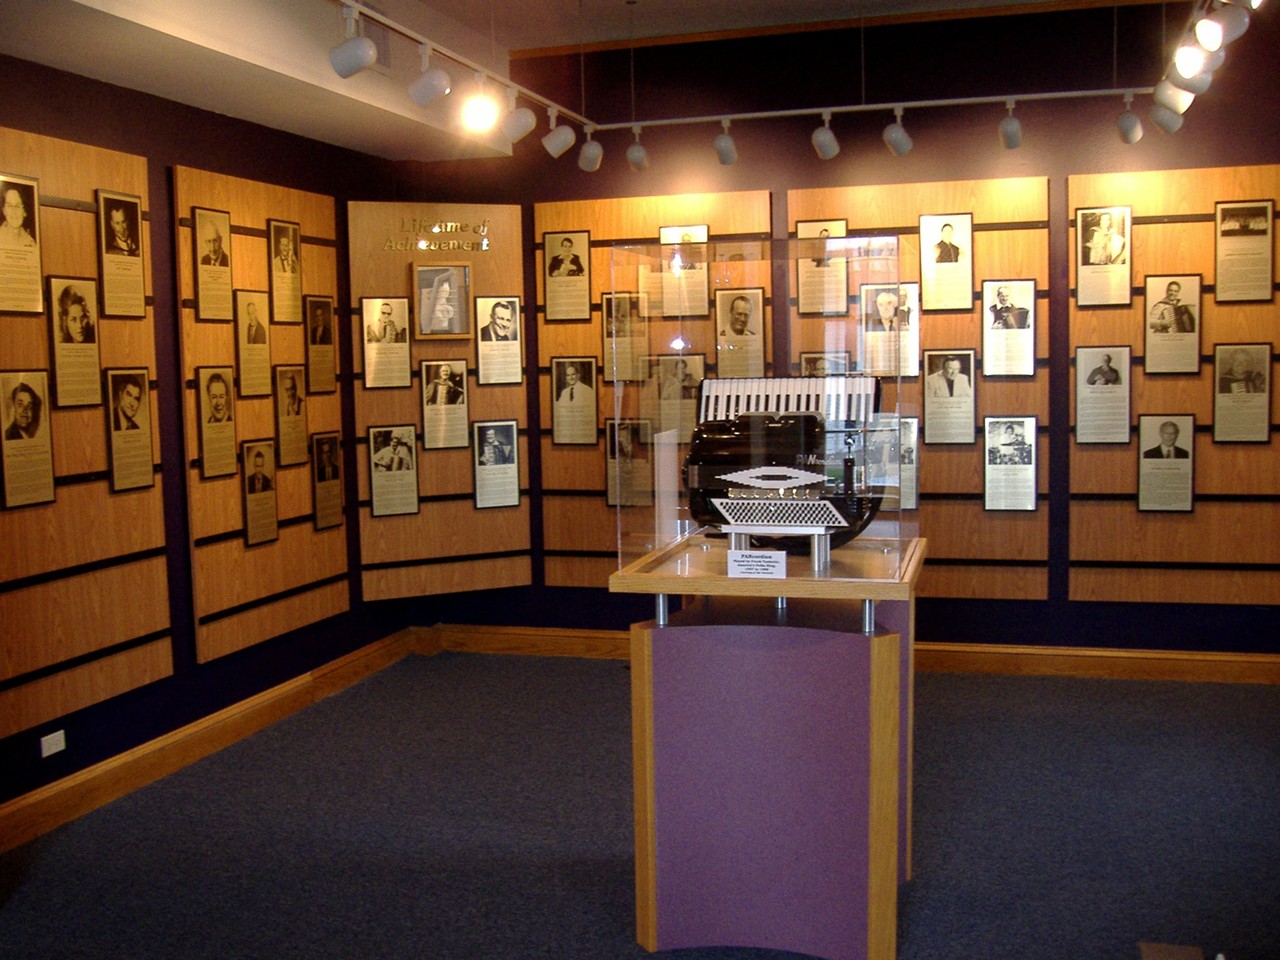 Visit The National Cleveland-Style Polka Hall of Fame and Museum
605 East 222nd St., Euclid
The Rock n’ Roll Hall of Fame isn’t the only musical hall of fame in Cleveland. Yes, we have a hall of fame dedicated to Cleveland-style polka music, the happiest sound around. "The National Cleveland-Style Polka Hall of Fame was founded in 1987 by musicians and leaders of Slovenian and ethnic organizations. The museum traces the story of the city's home-grown sound from its roots in the old Slovenian neighborhoods to nationwide popularity with audio exhibits, historic photographs and original instruments. The archive preserves 6,000 vintage recordings, dating back to 1913."